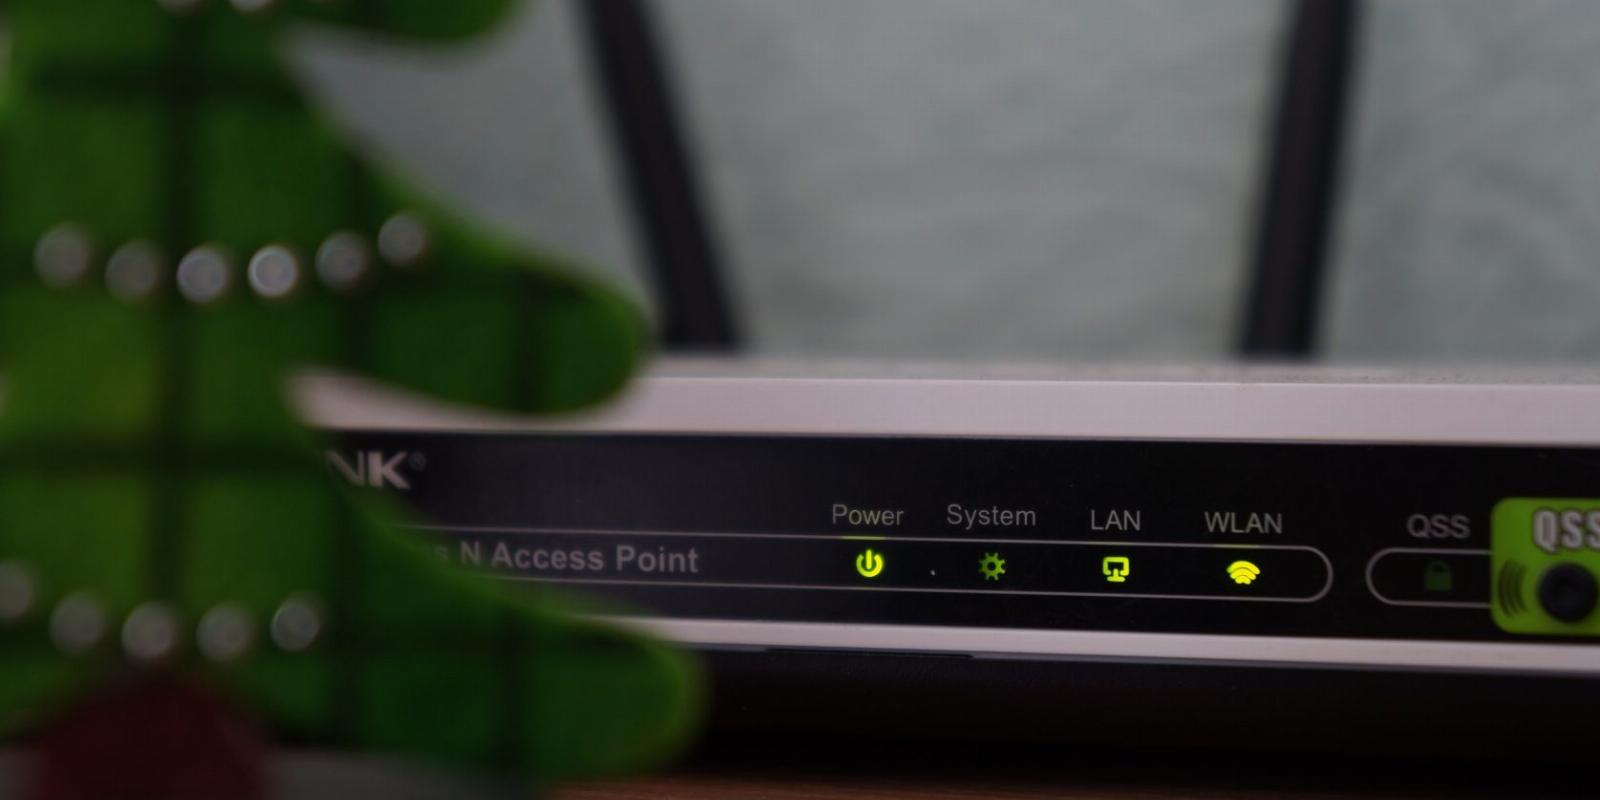 How to Reset a TP-Link Router to Factory Defaults